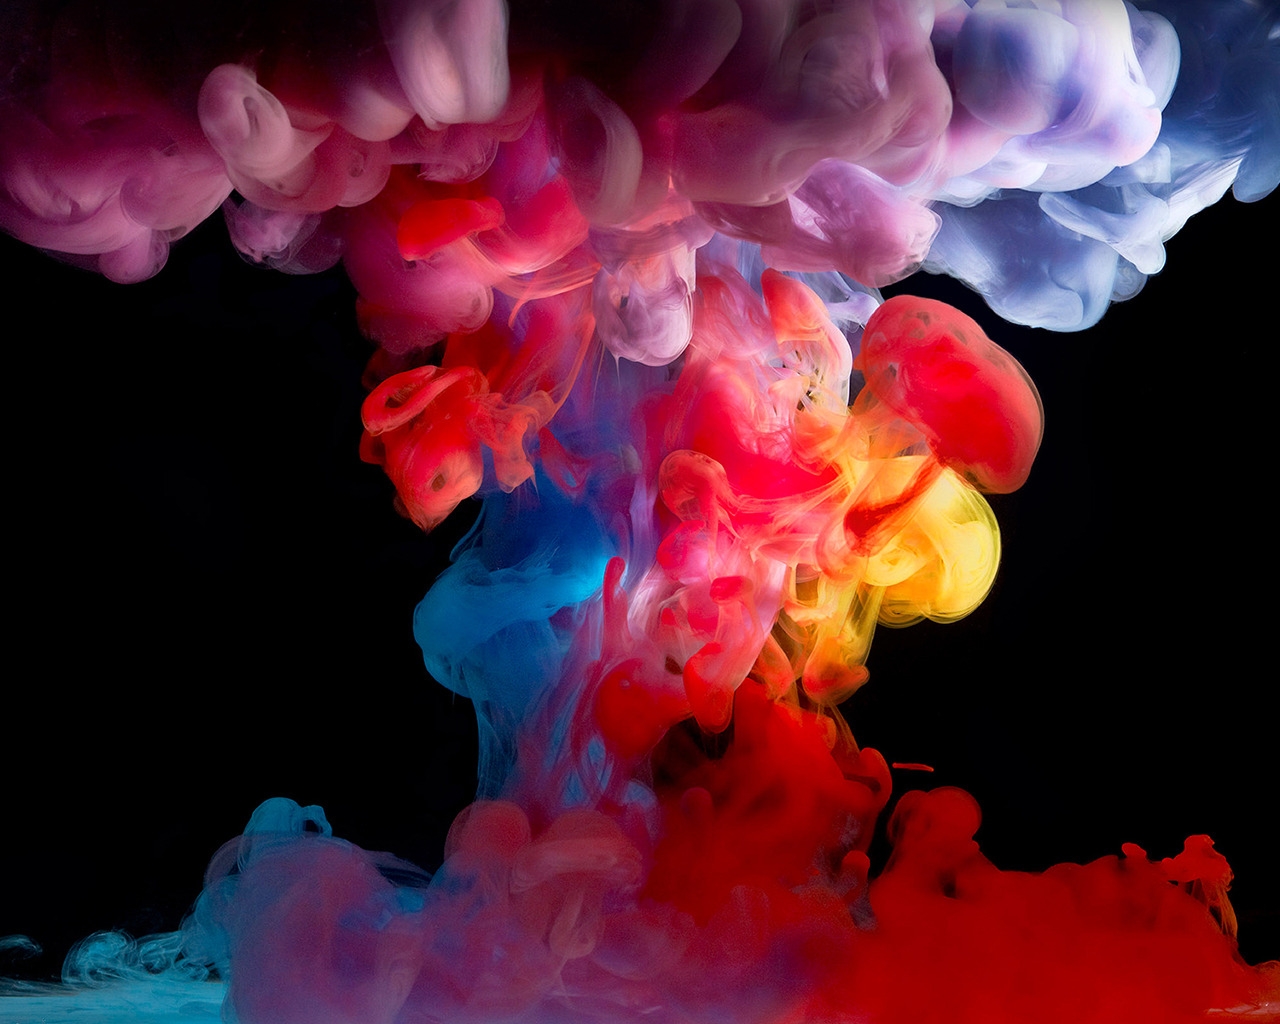 Colored Smoke Paint for 1280 x 1024 resolution